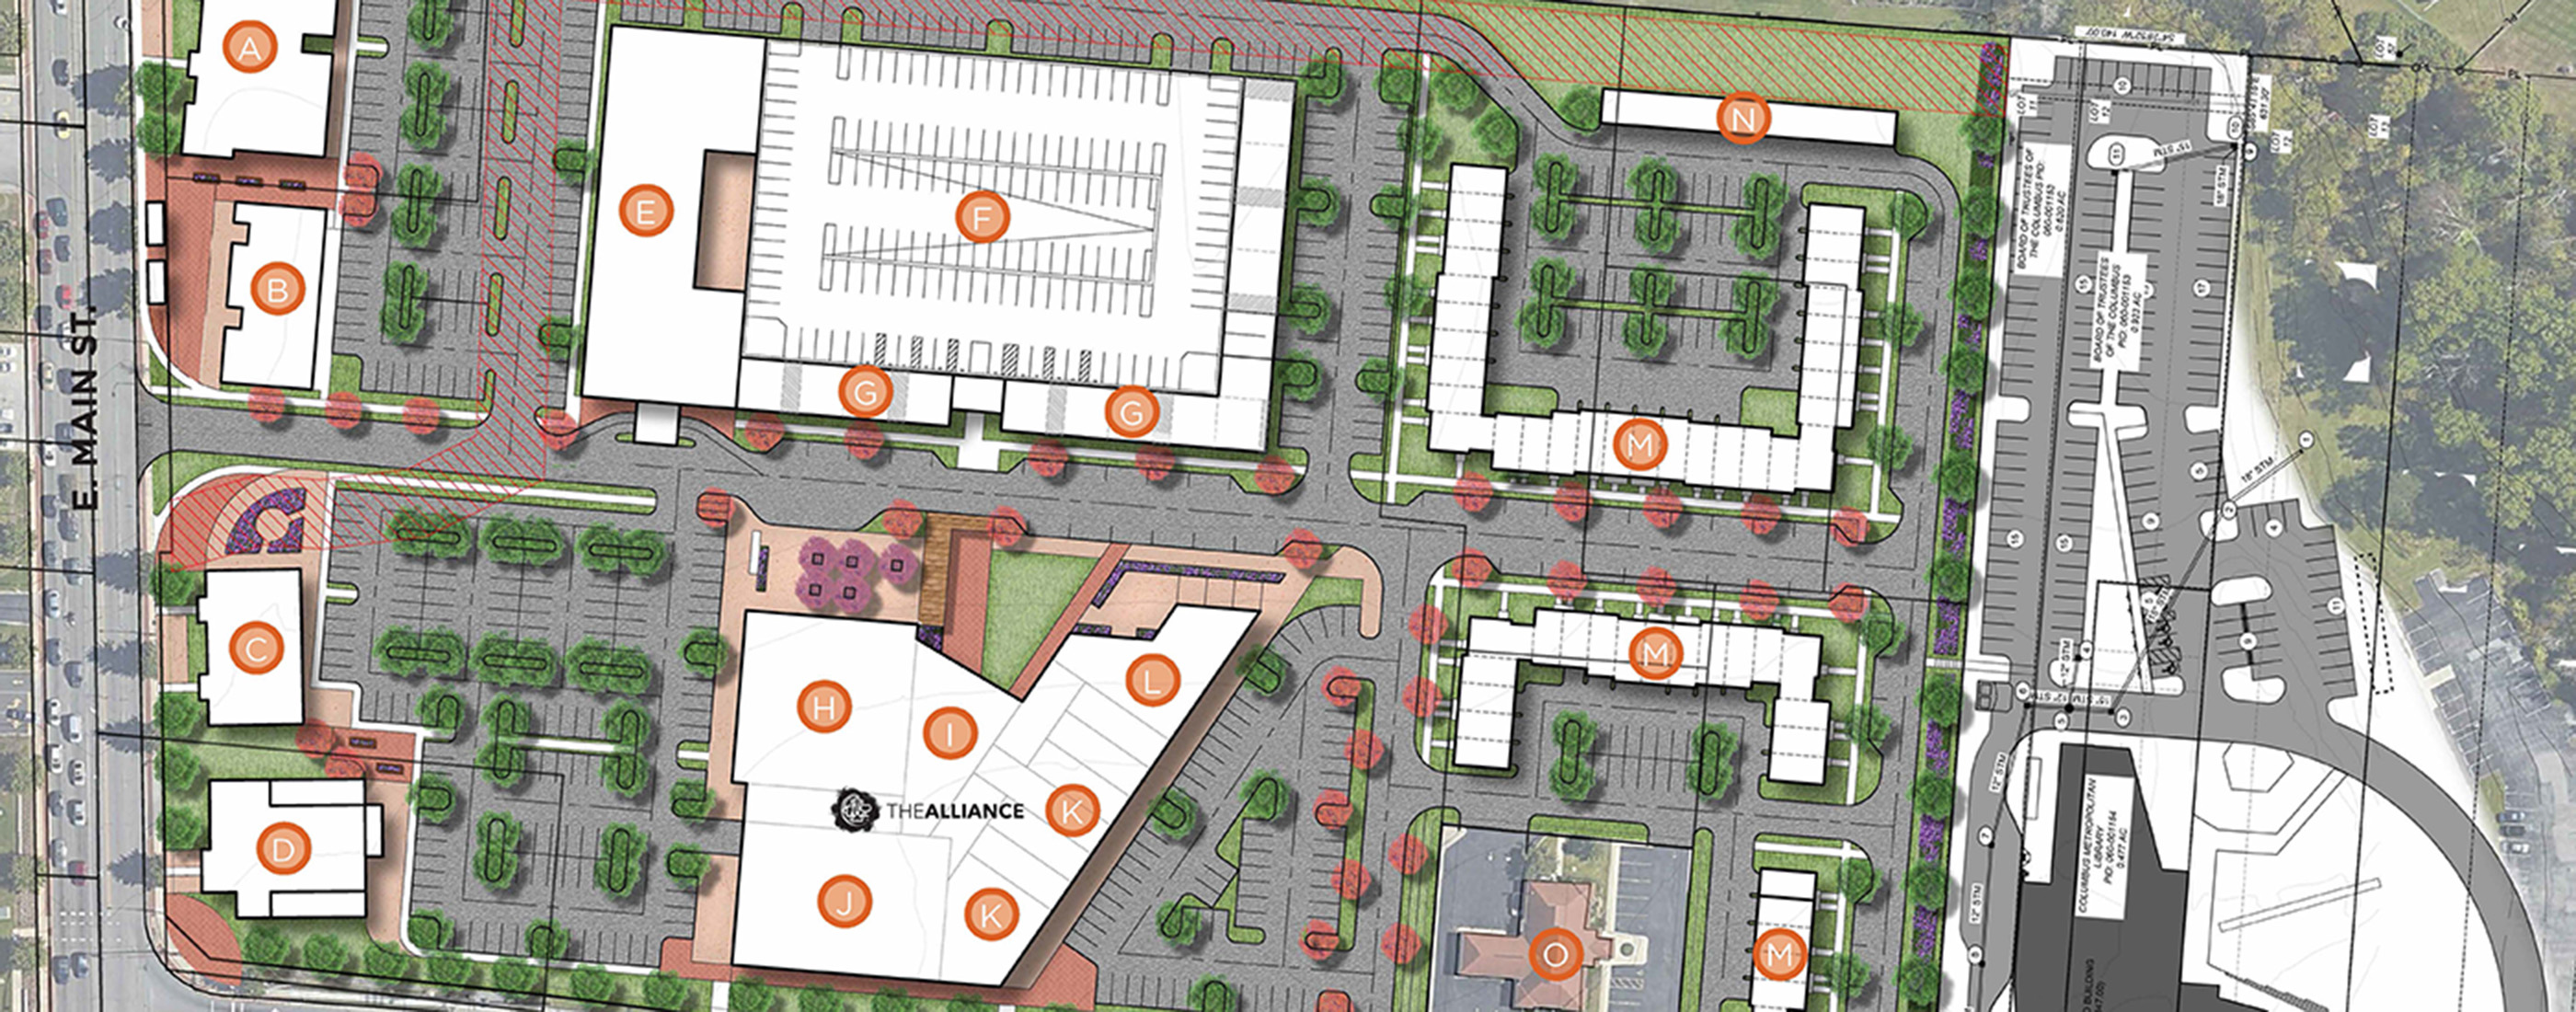 Alliance Place site plan illustrates buildings that surround a central gathering space